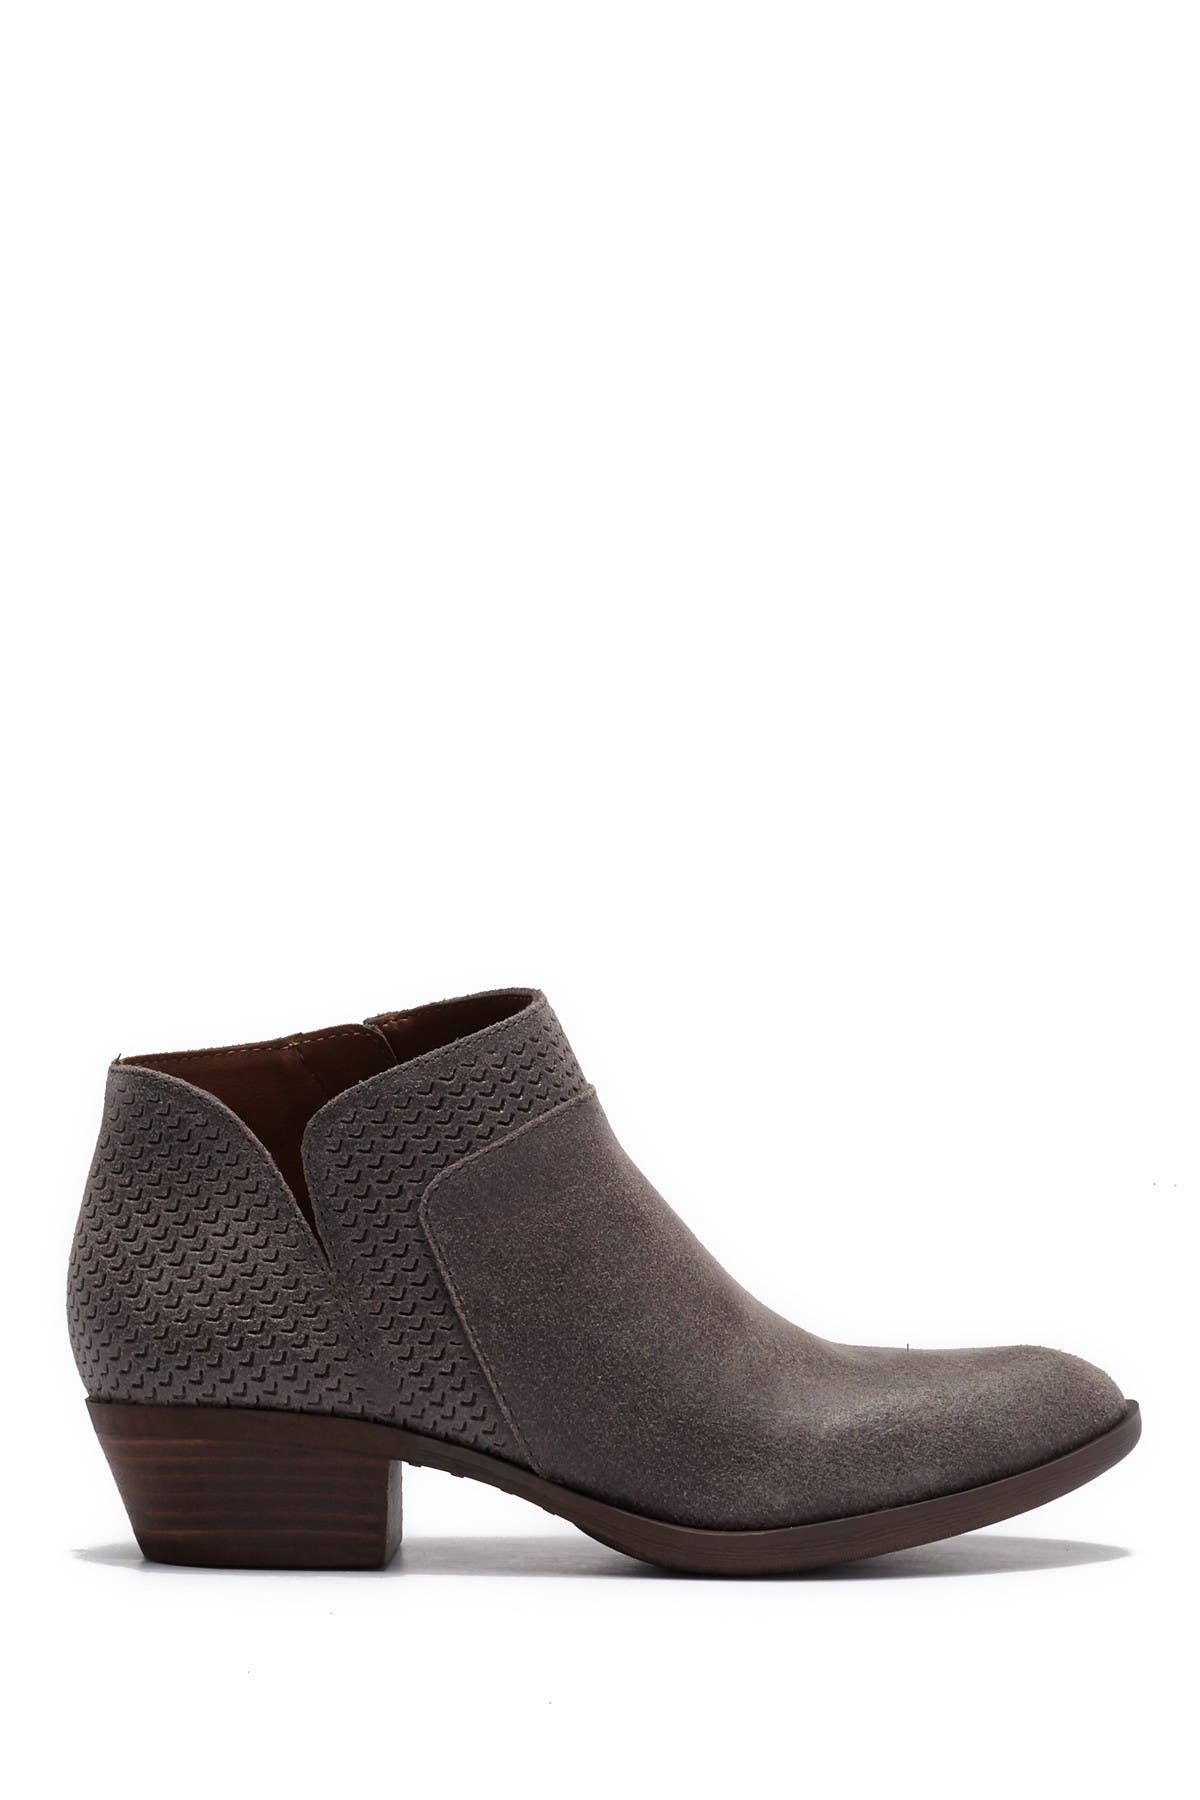 lucky brand brintly bootie